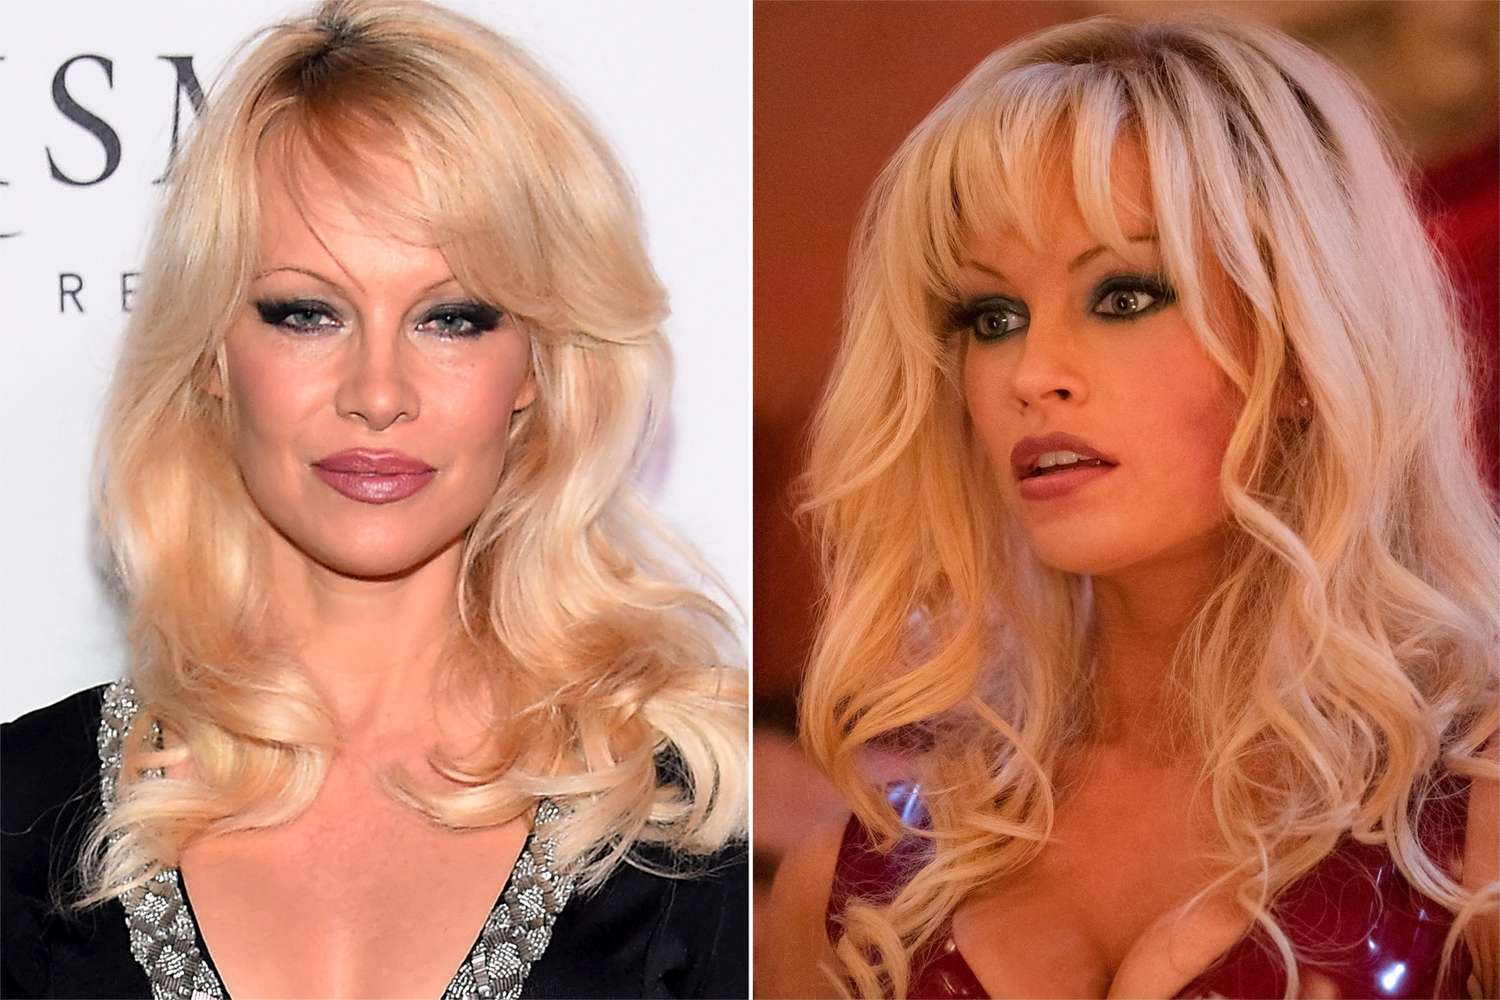 Pam & Tommy: Pamela Anderson will 'never, never watch,' source says 